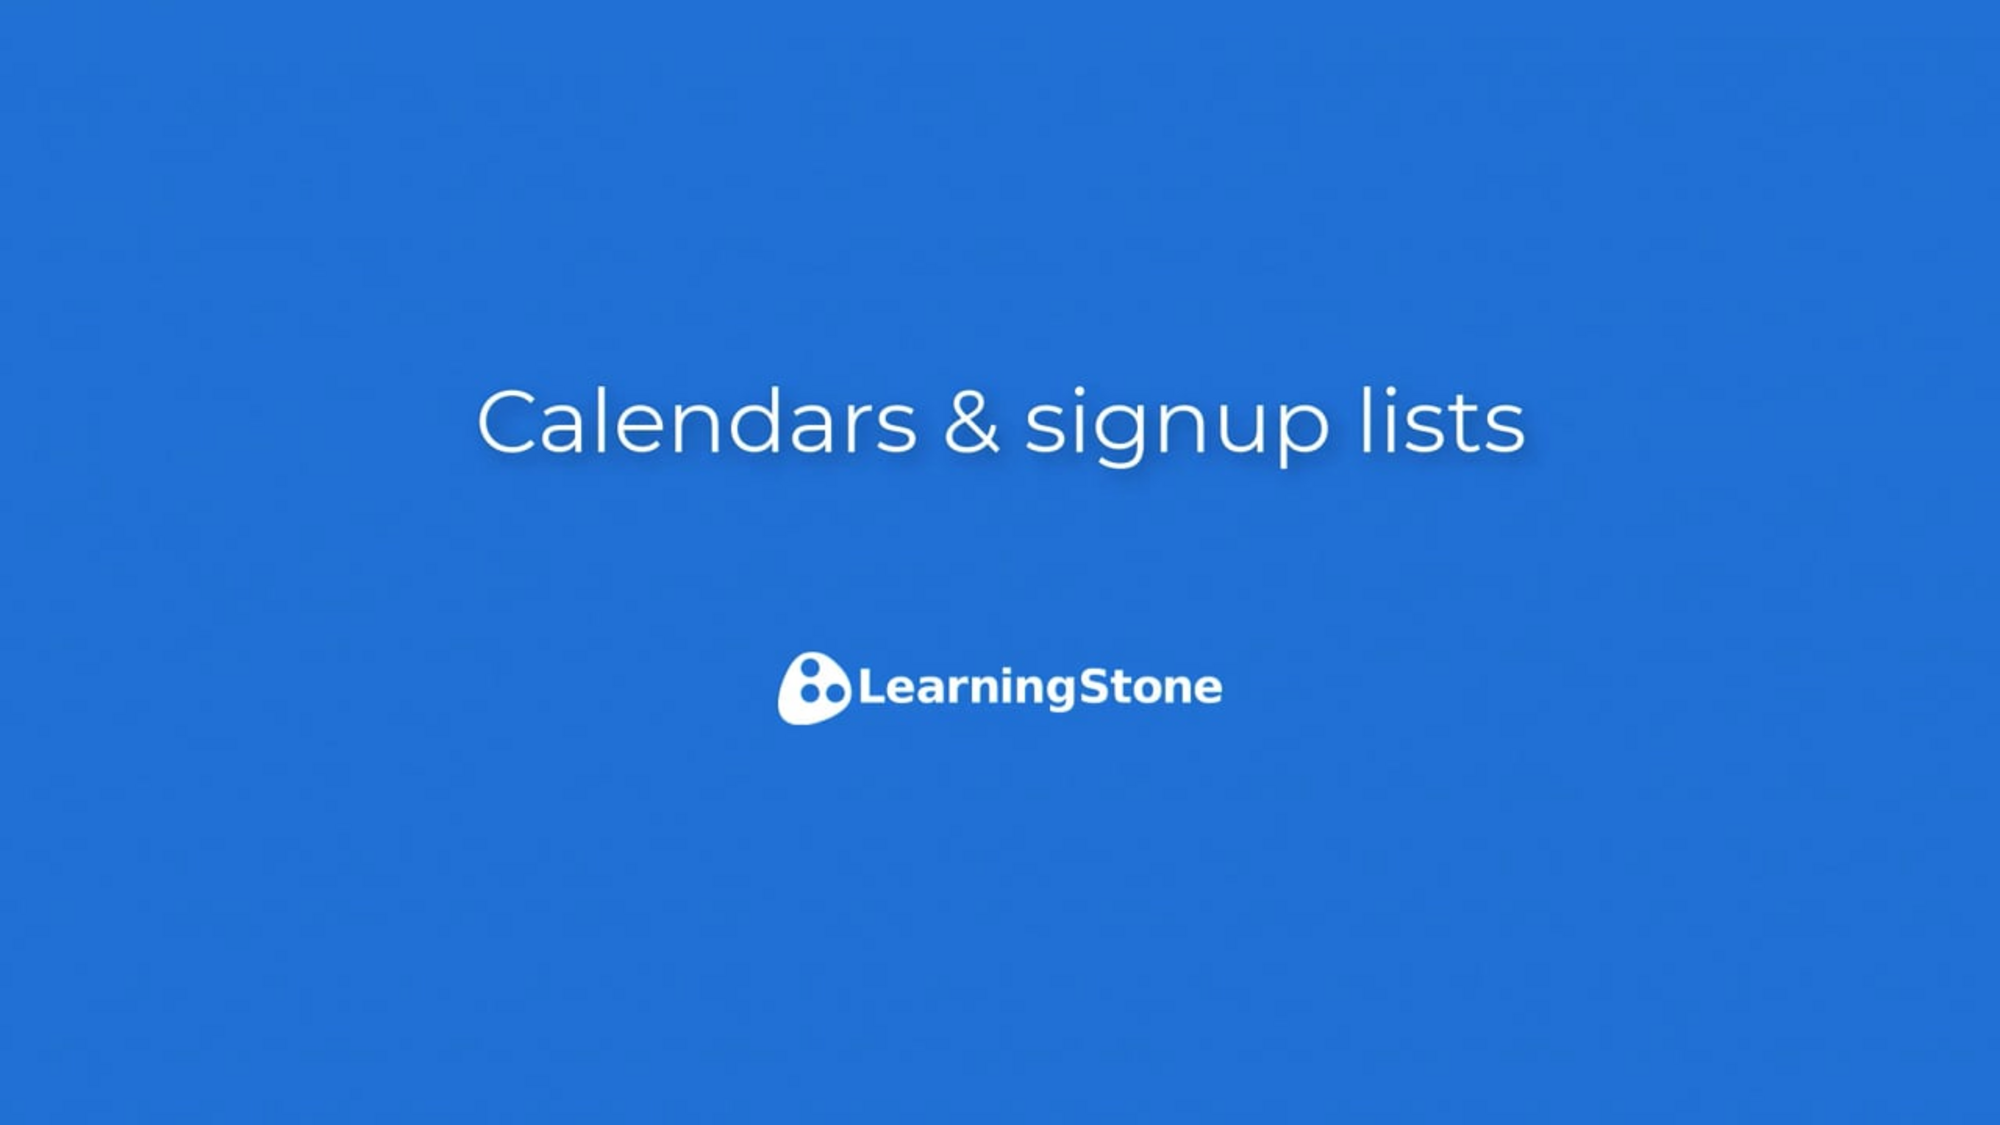 Calendars and signup lists